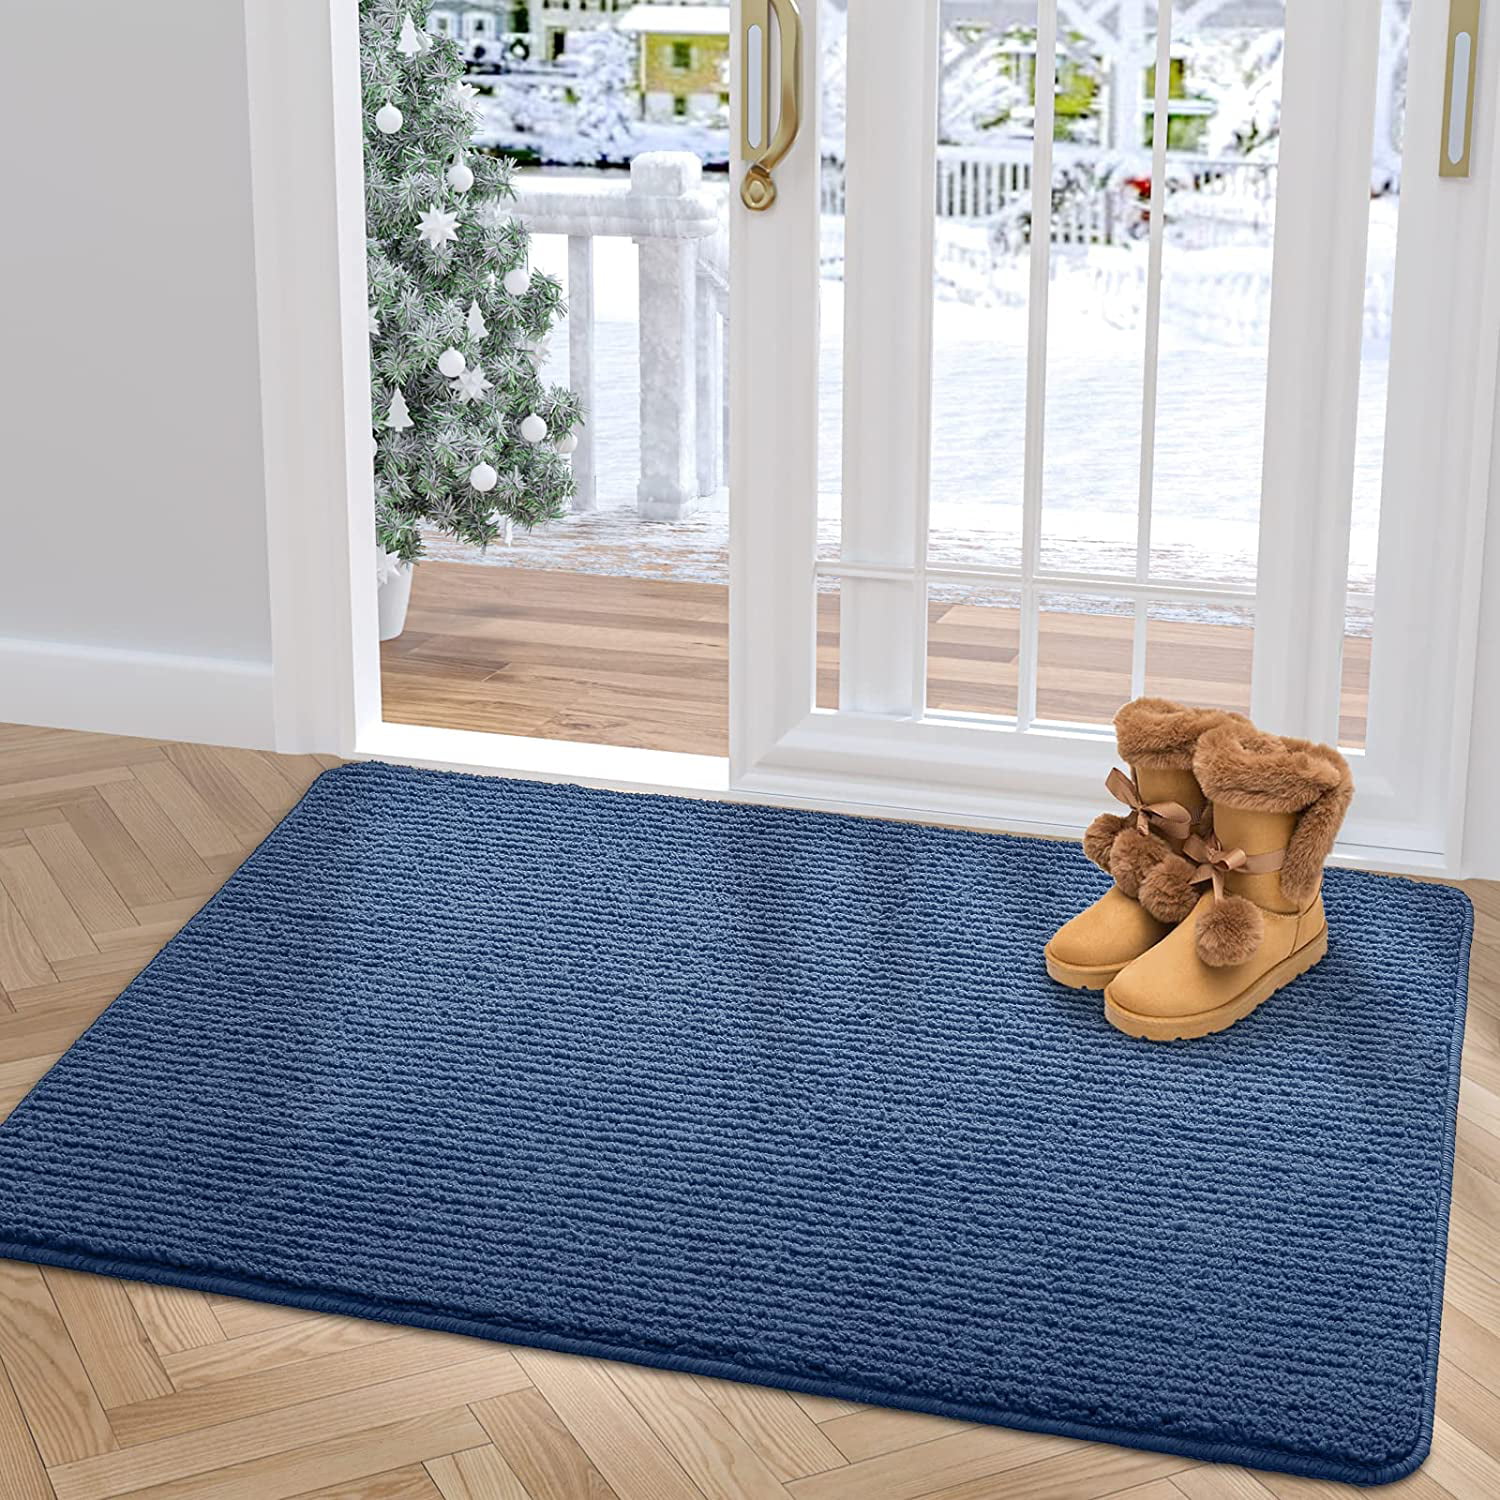 Charcoal Paper Floor Mattress Durable and Easy Clean Absorbent Apply to Entryway/Front Door/Porch 